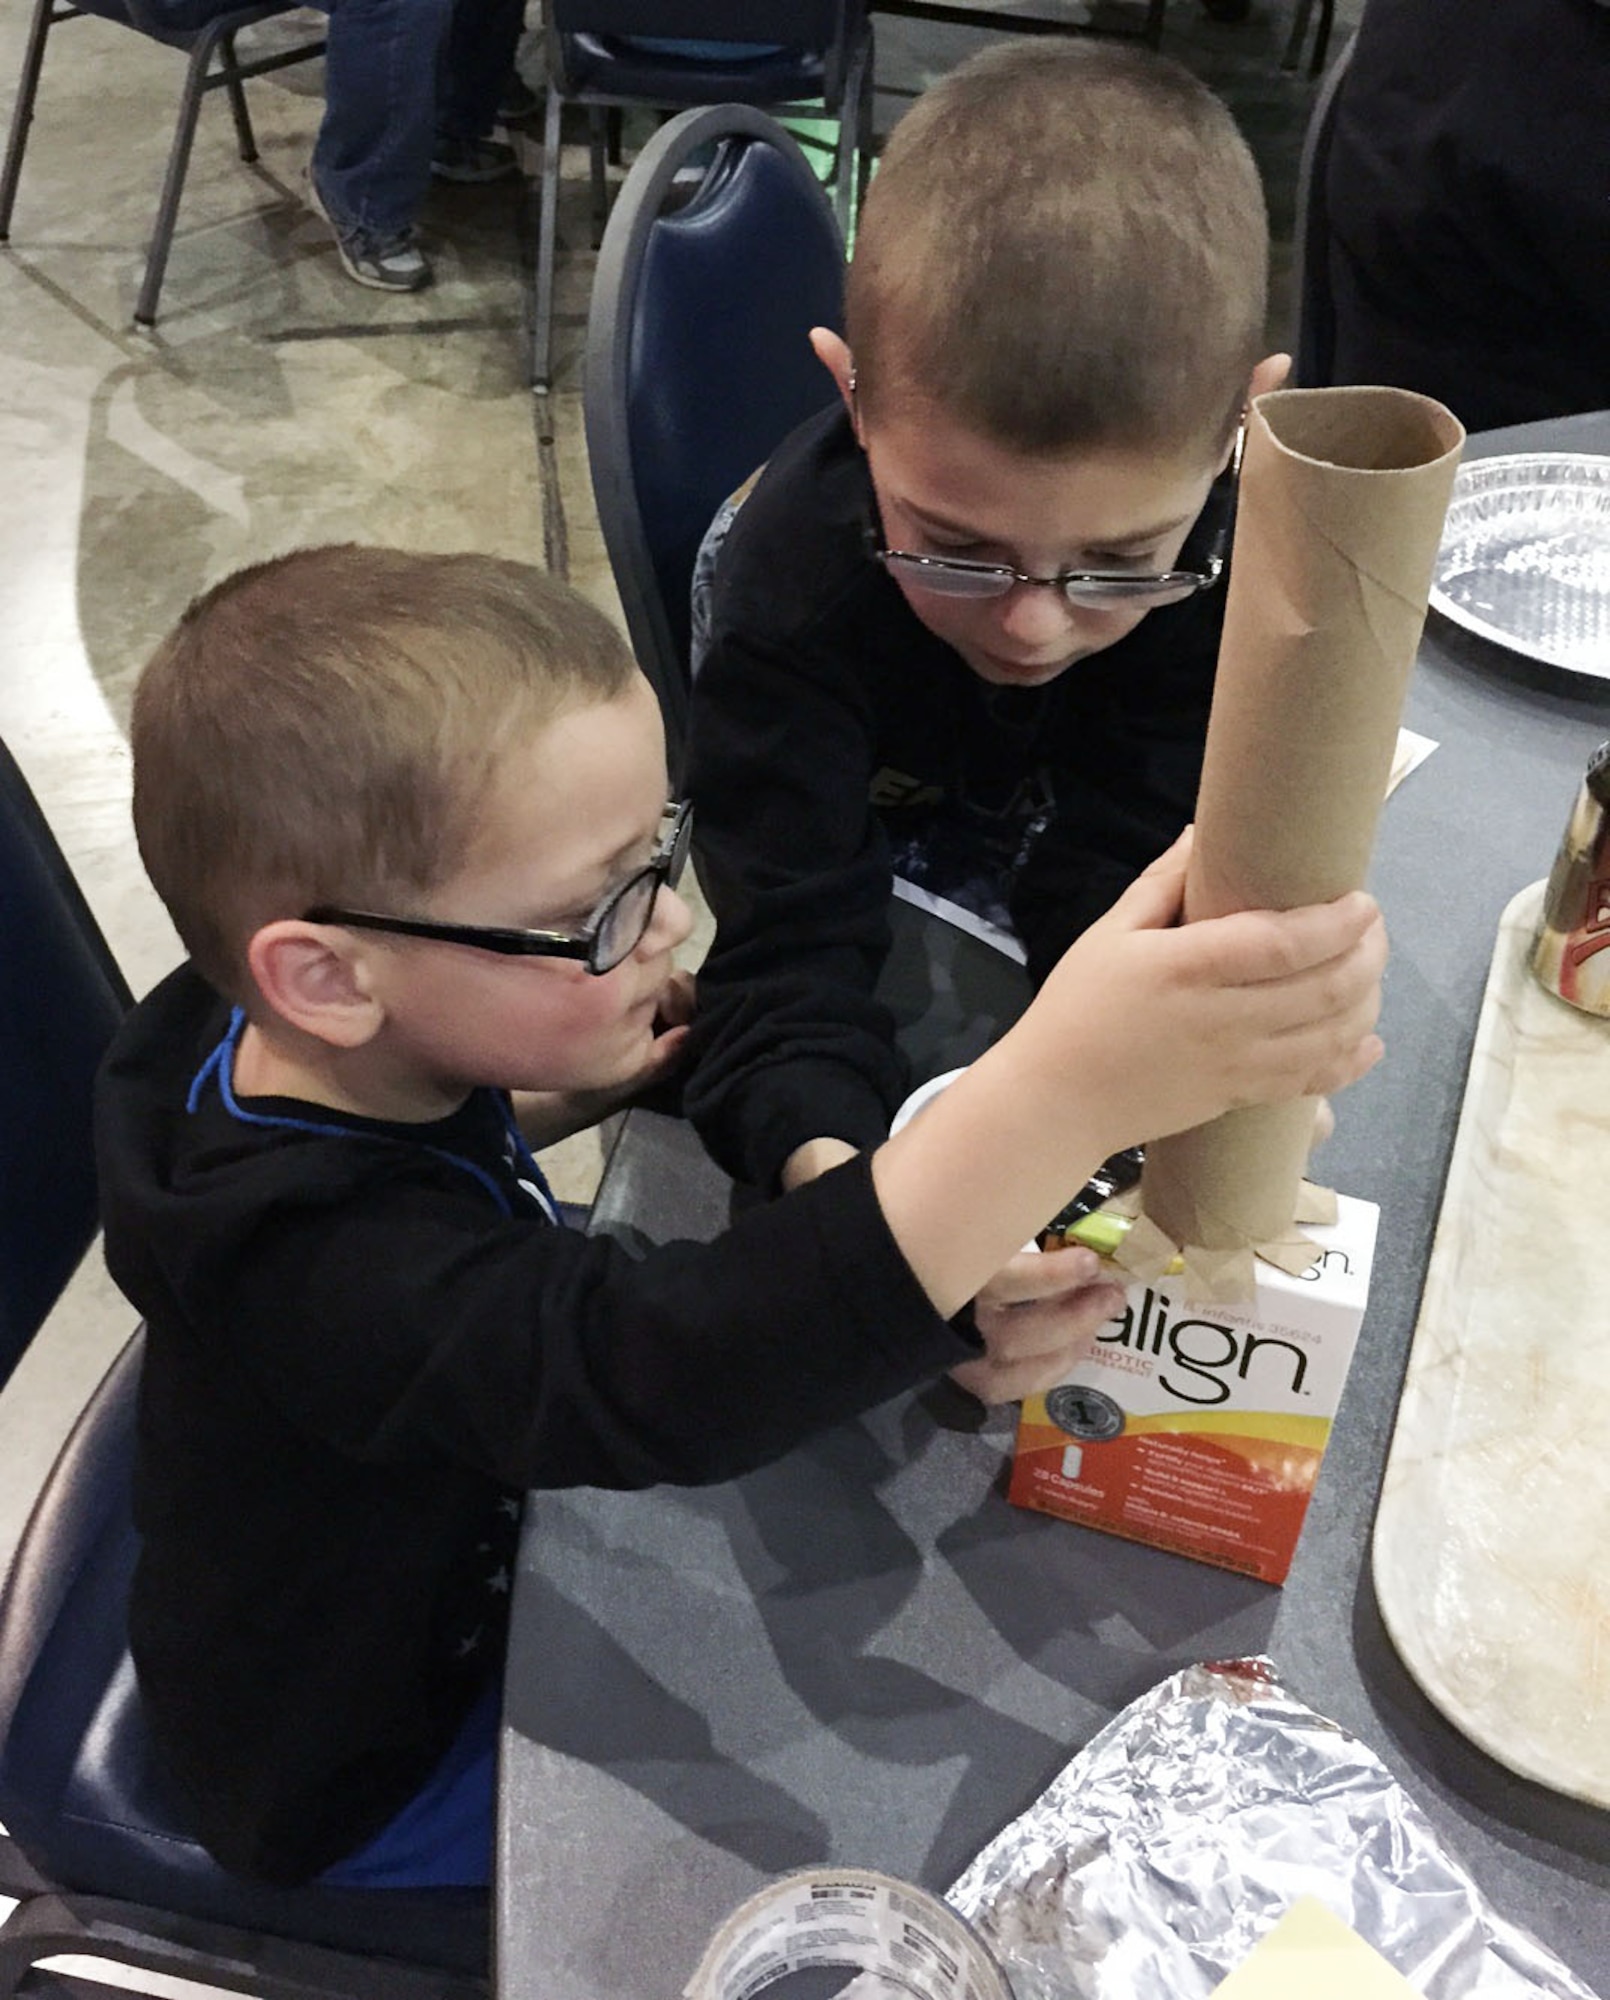 DAYTON, Ohio -- Children and adults of all ages enjoyed creating their own space stations during Family Day at the National Museum of the U.S. Air Force. (U.S. Air Force photo)